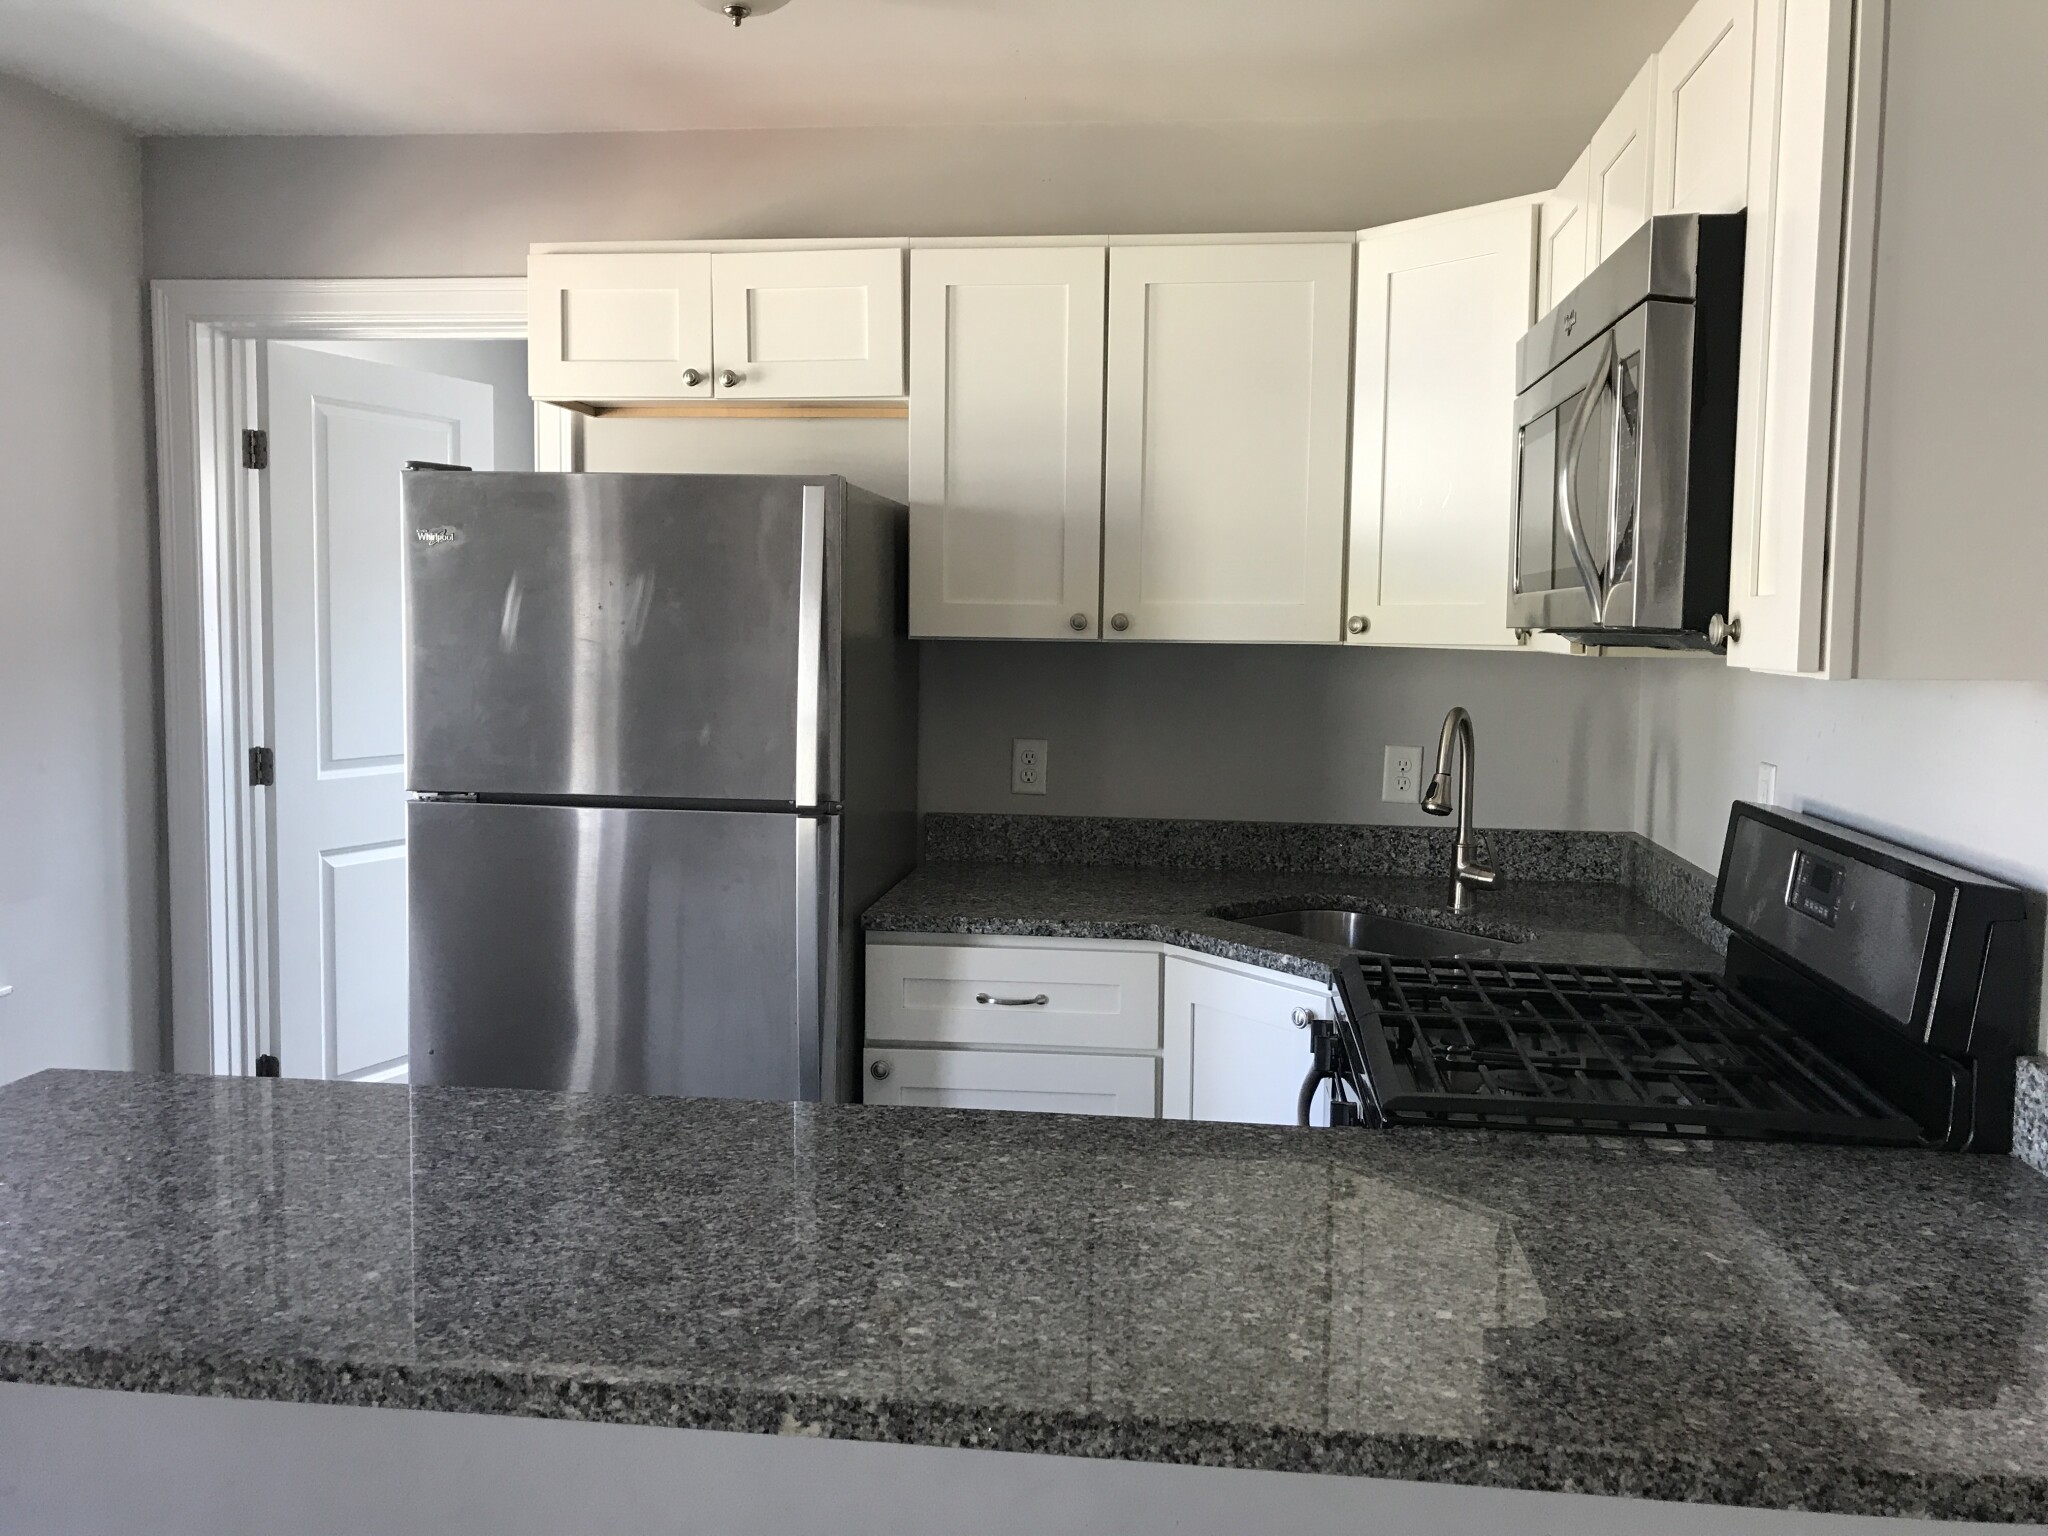 Photos of apartment on Beale St.,Quincy MA 02170